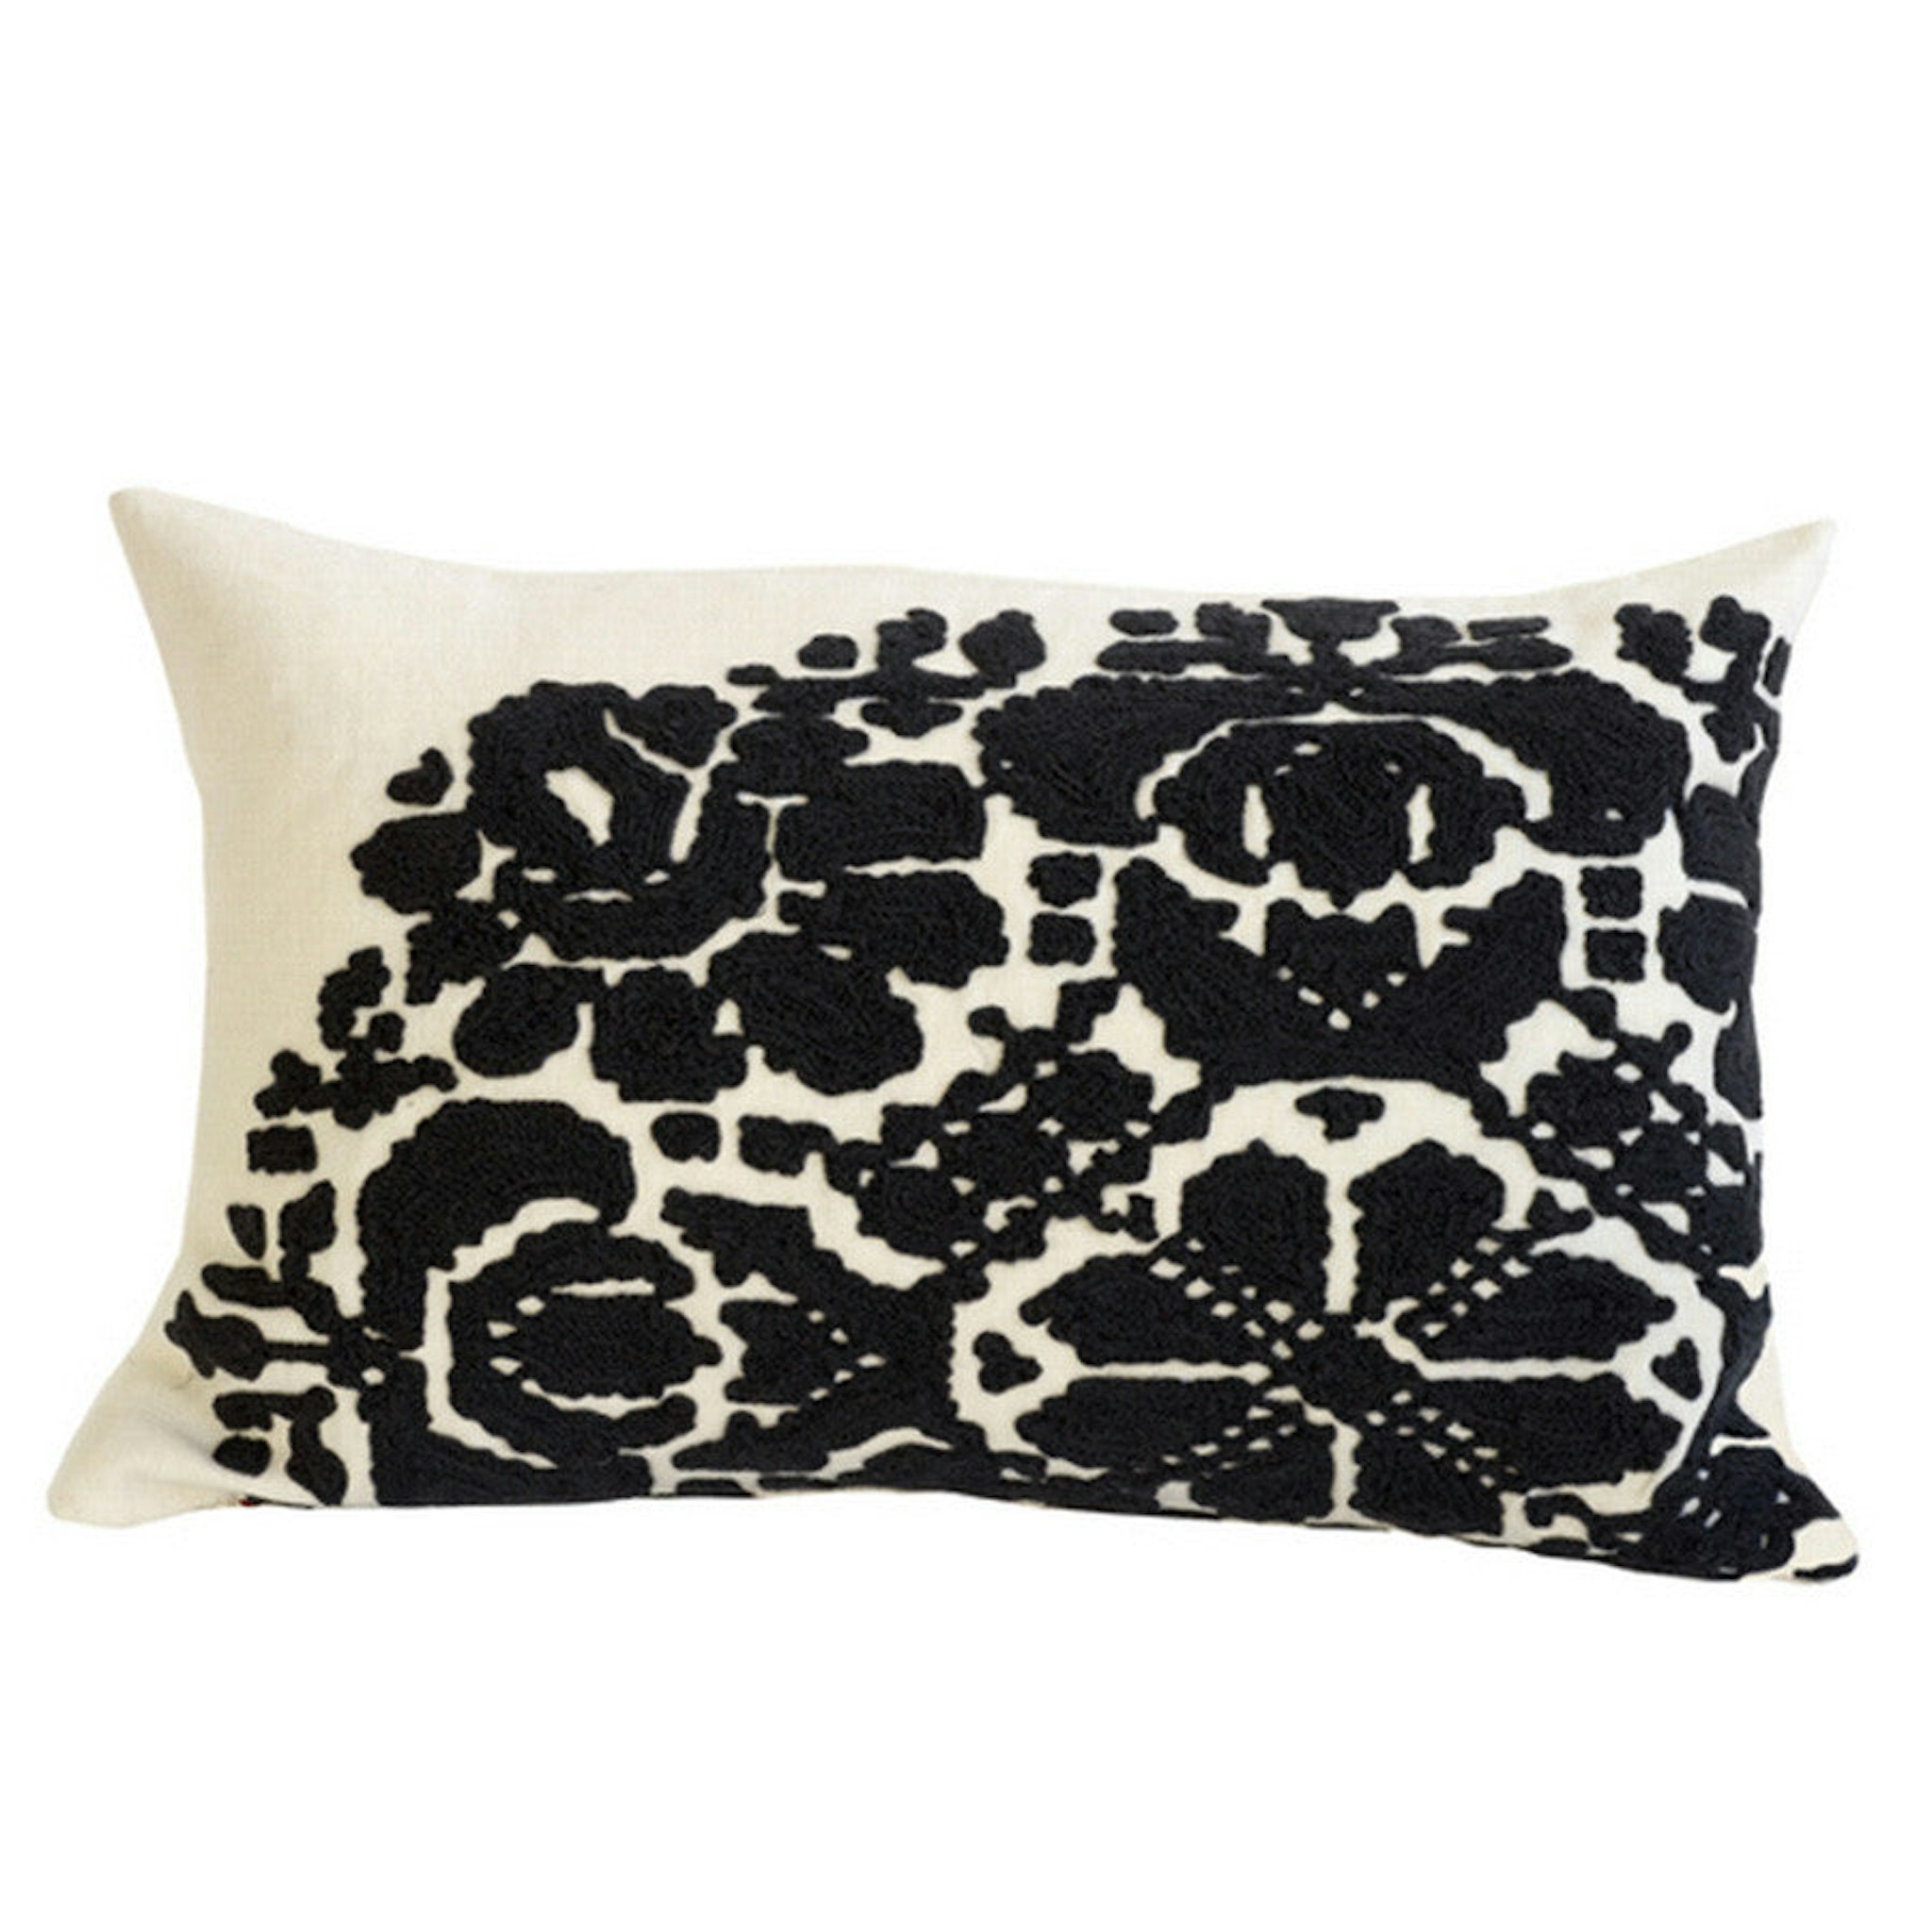 Needlepoint cushion by Charlene Mullen - Clearance